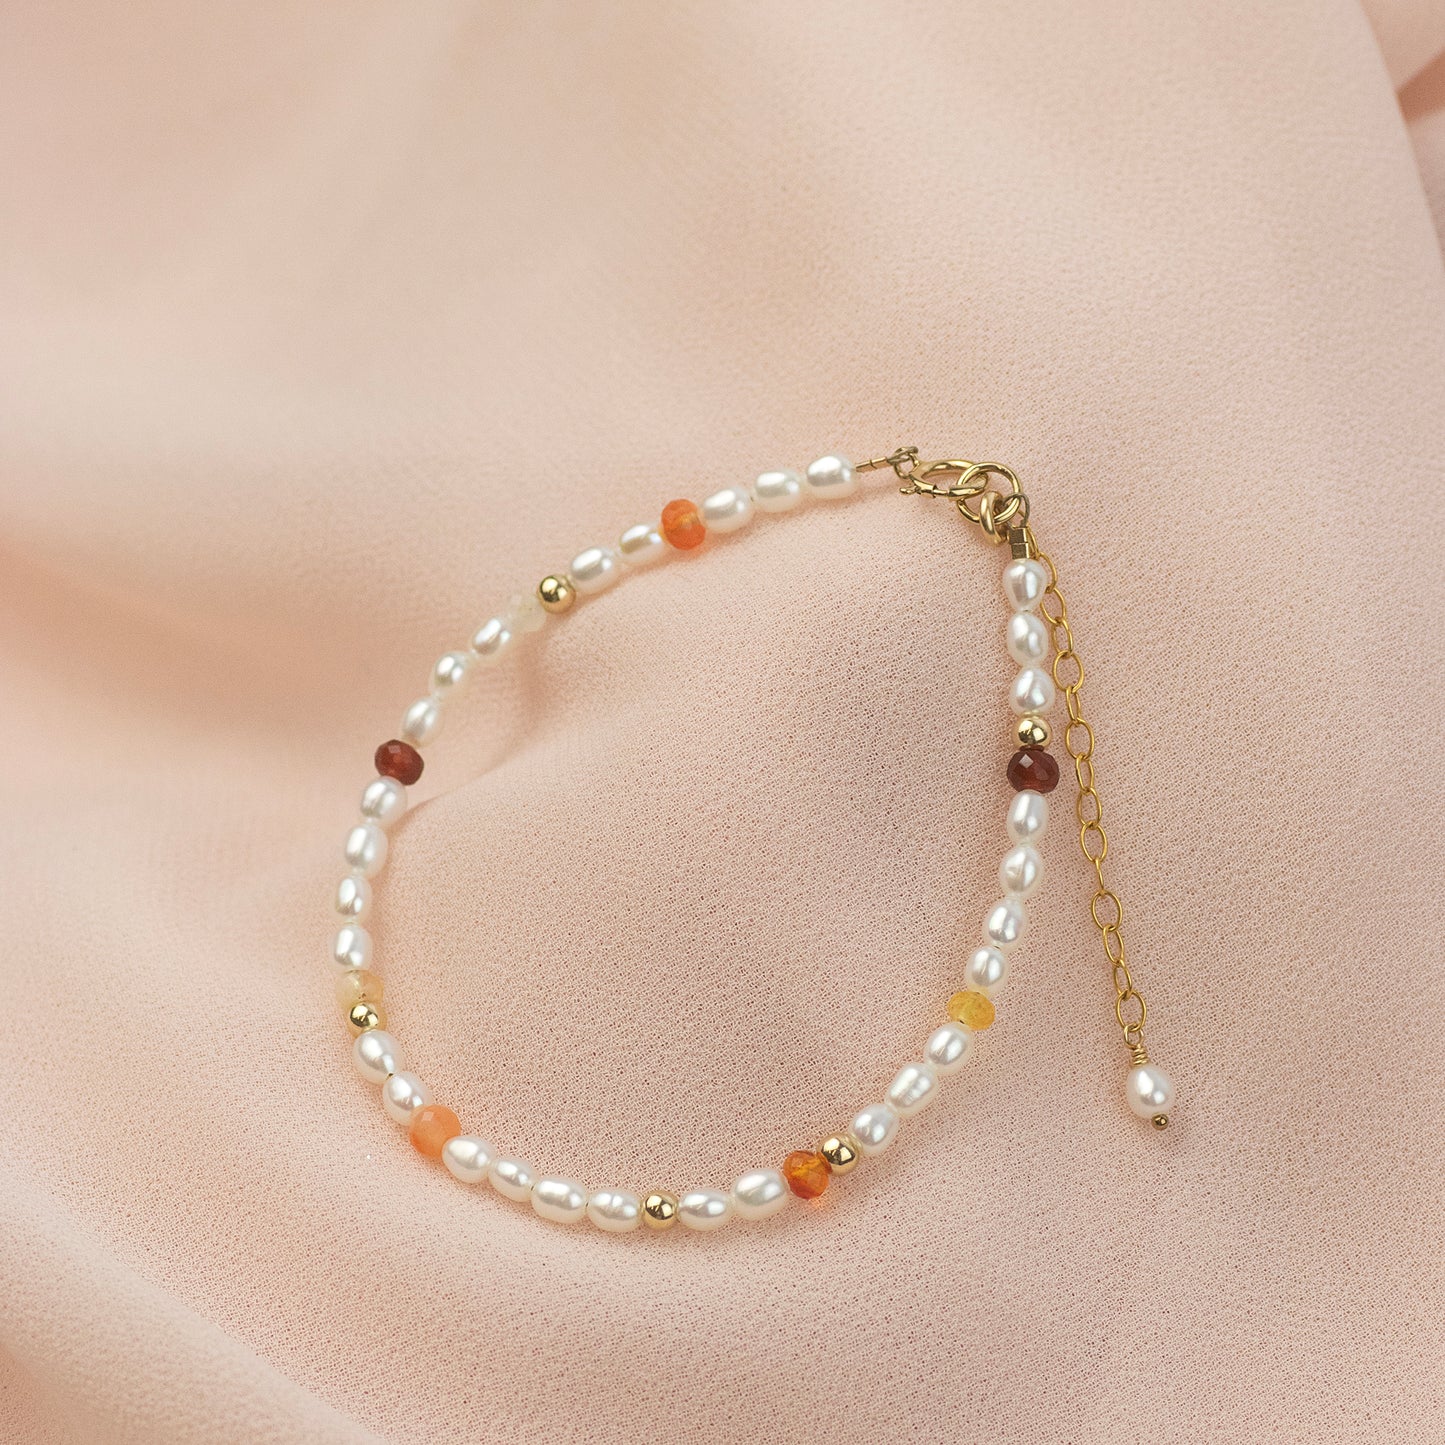 Pearl and Fire Opal Bracelet - Passion, Success & Fortune